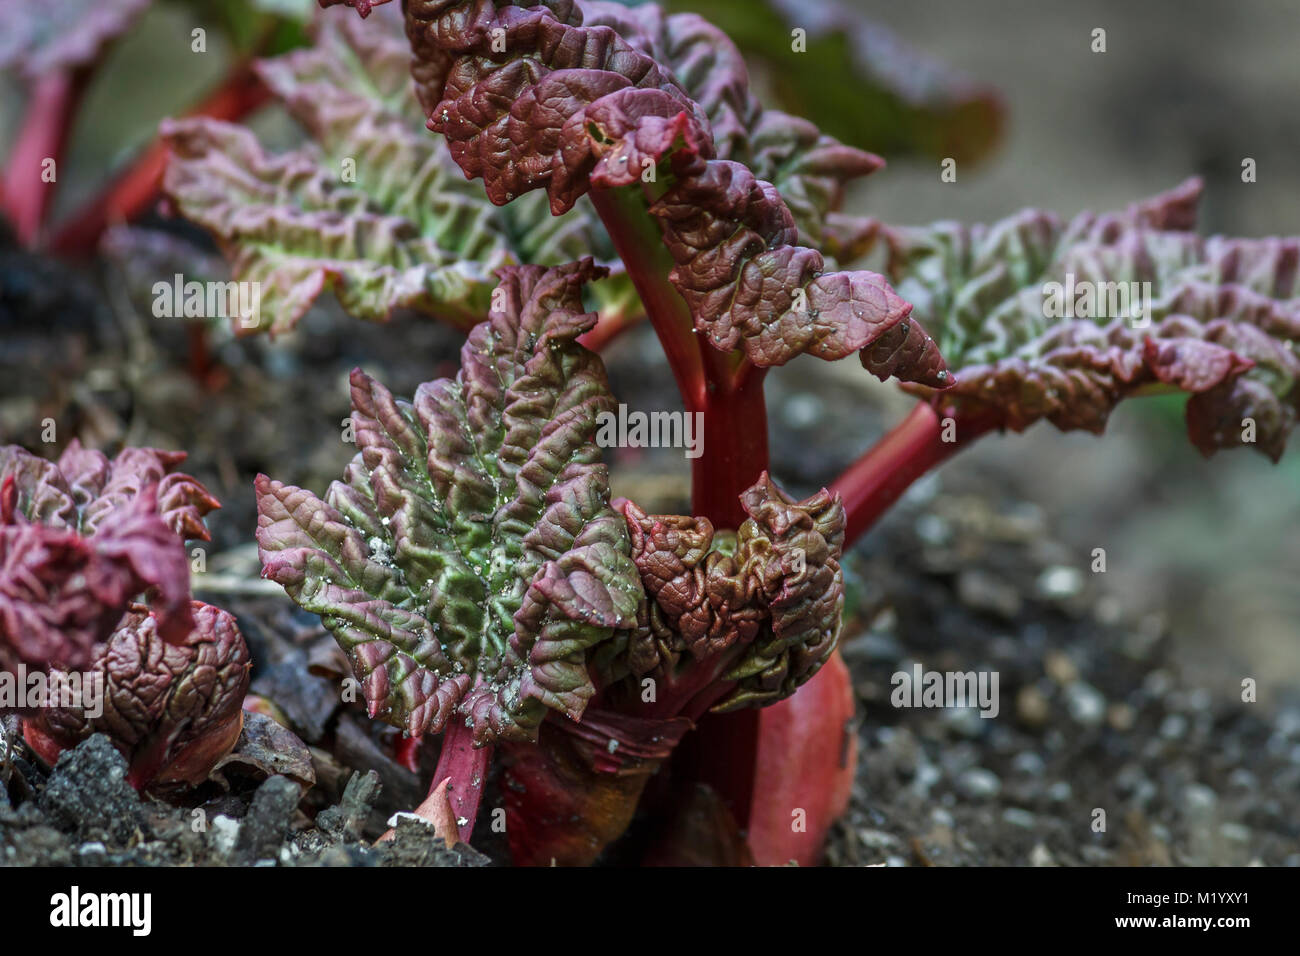 A close view of rhubarb in an early spring garden shows deep red stems and wrinkled leaves that unfold and turn green up as they grow in the sunlight. Stock Photo